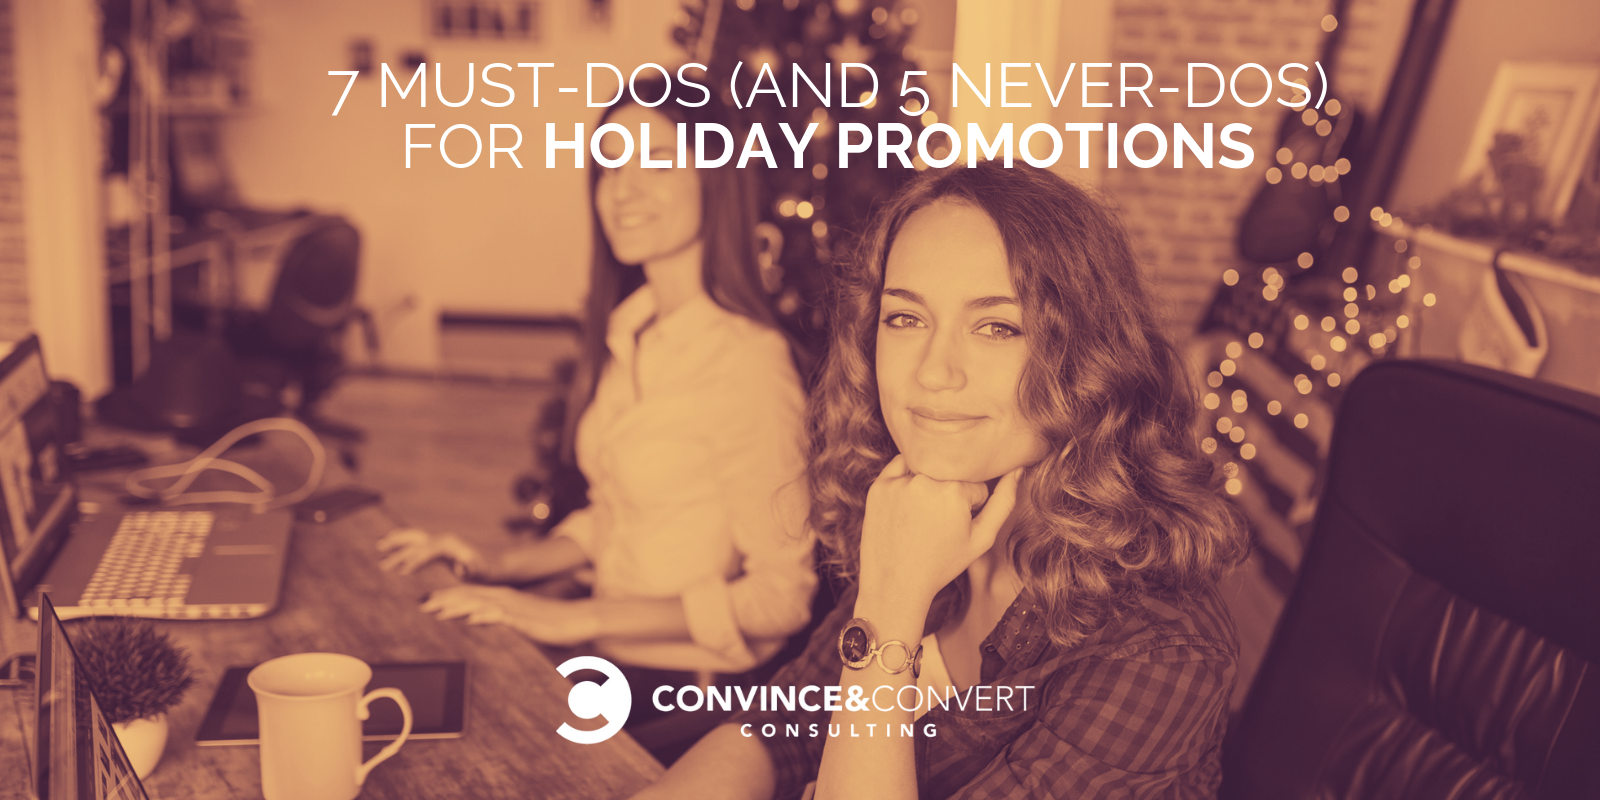 7 Must-Dos (and 5 Never-Dos) for Holiday Promotions